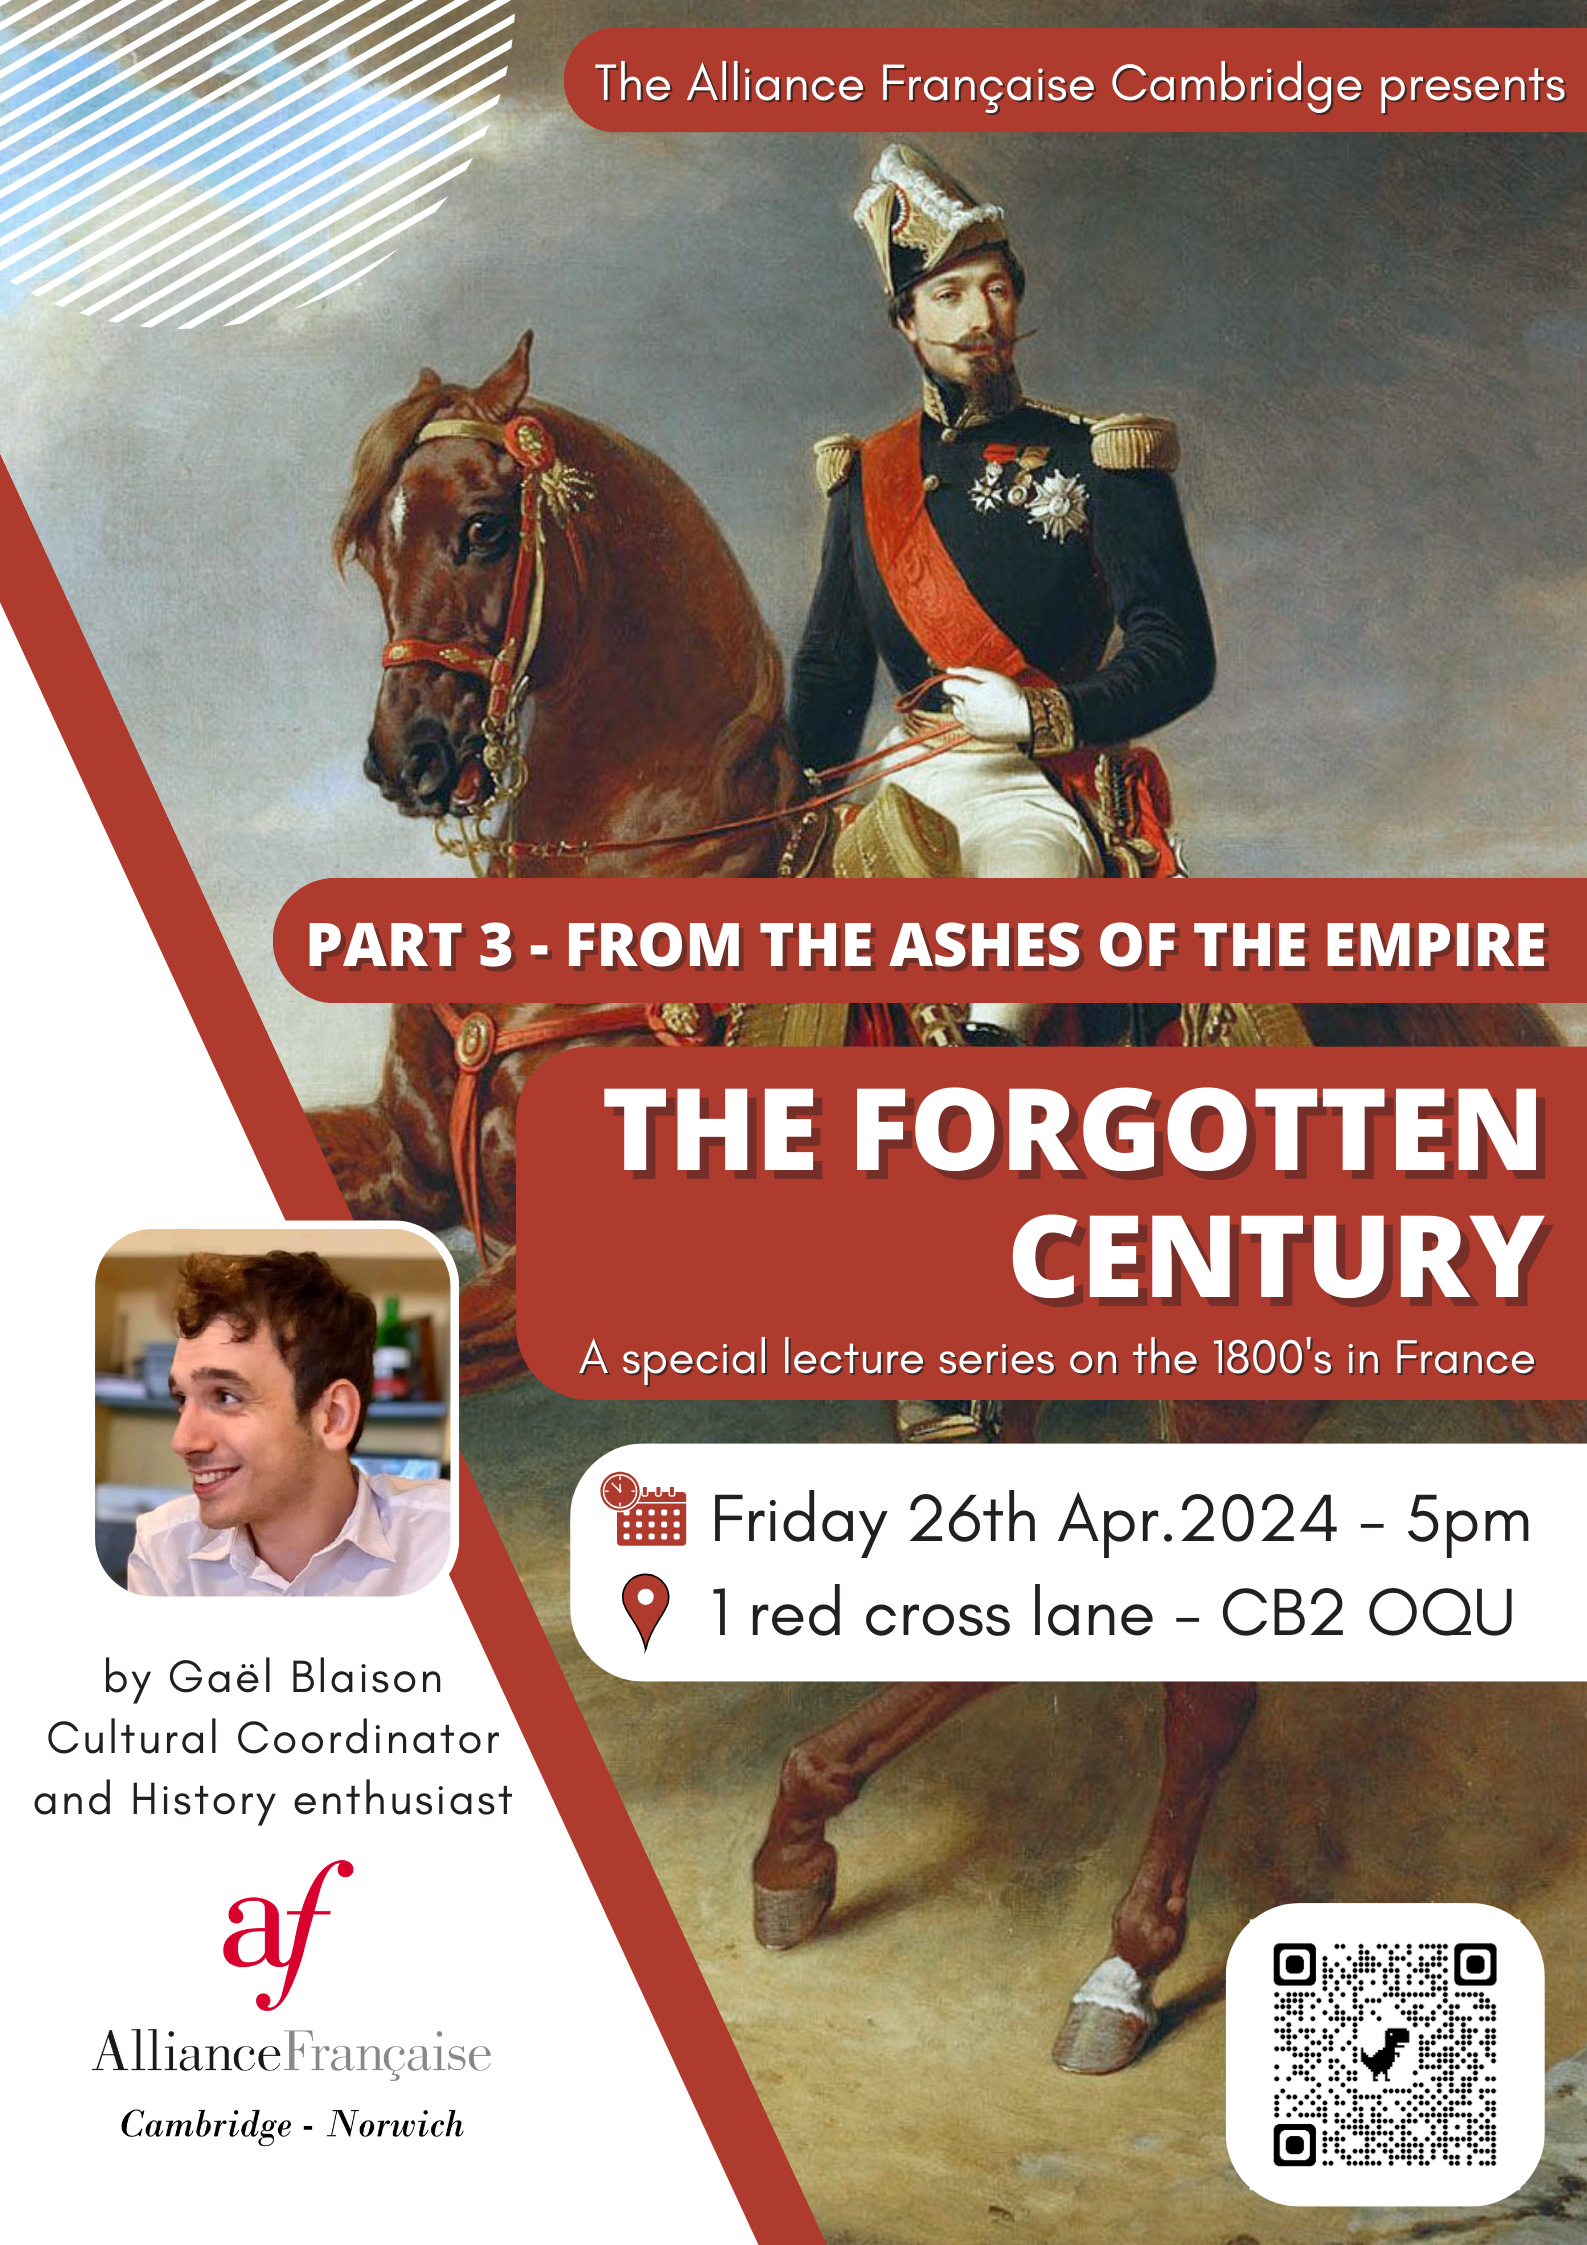 Talk - The forgotten century A special lecture series on the 1800's in France - part 3